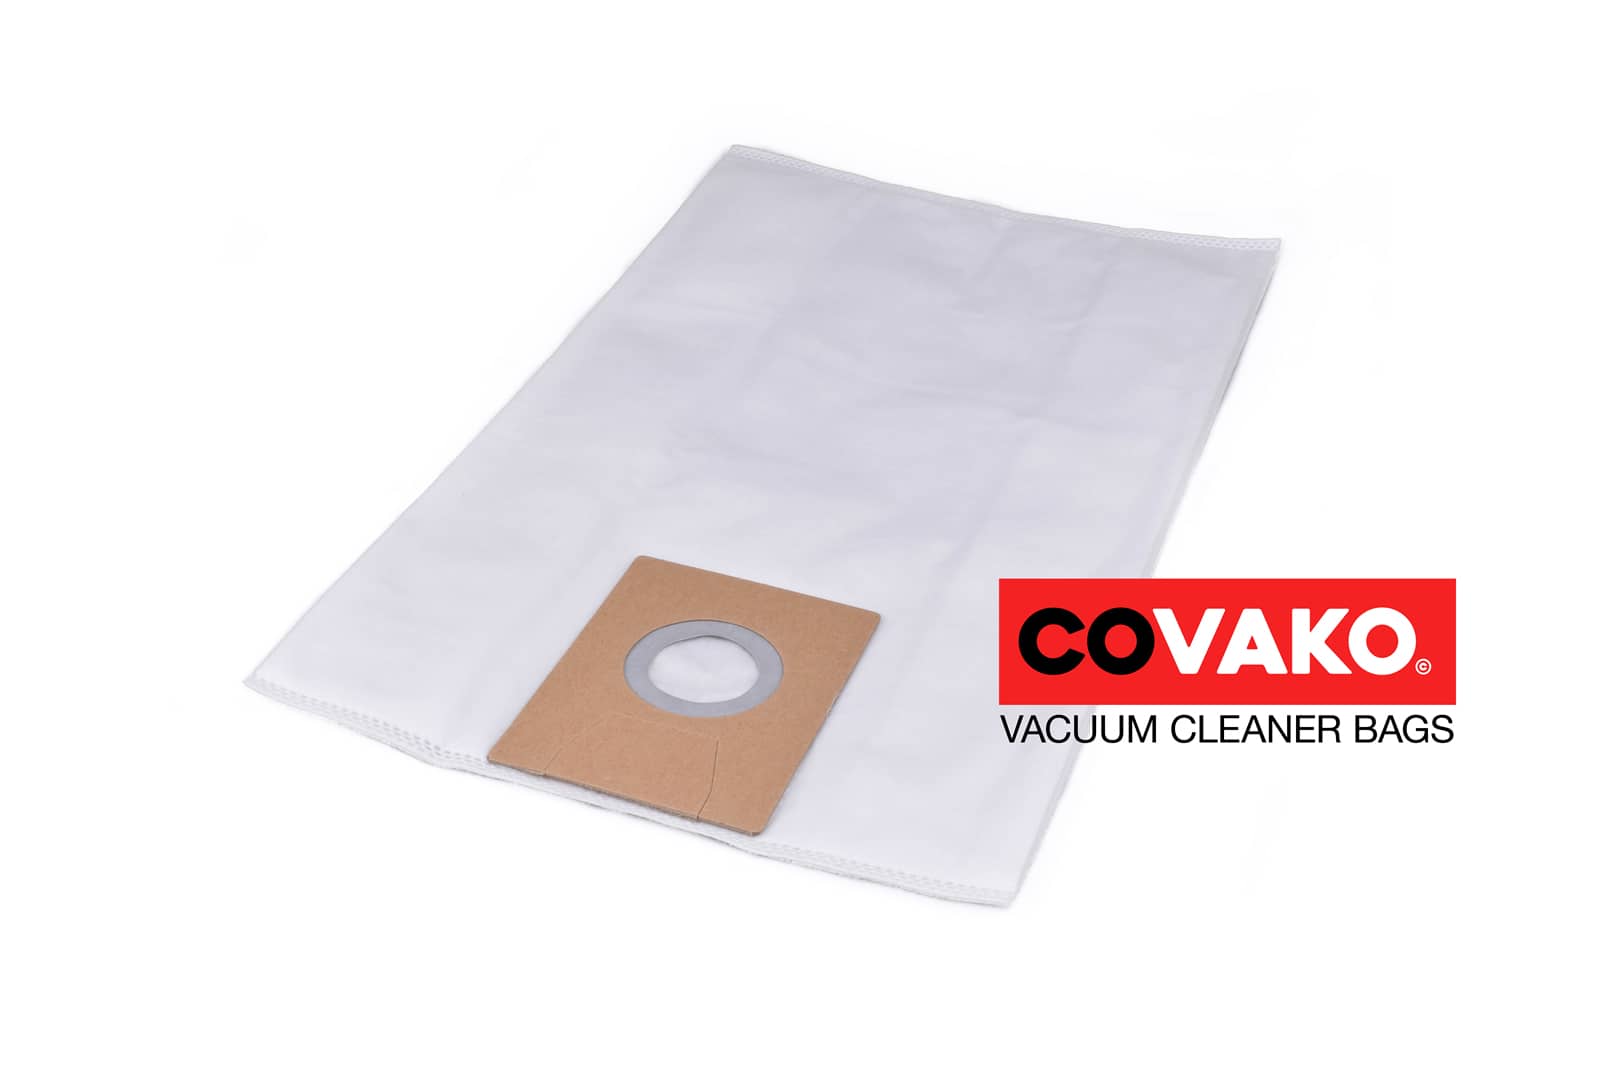 Fakir S 20 E / Synthesis - Fakir vacuum cleaner bags